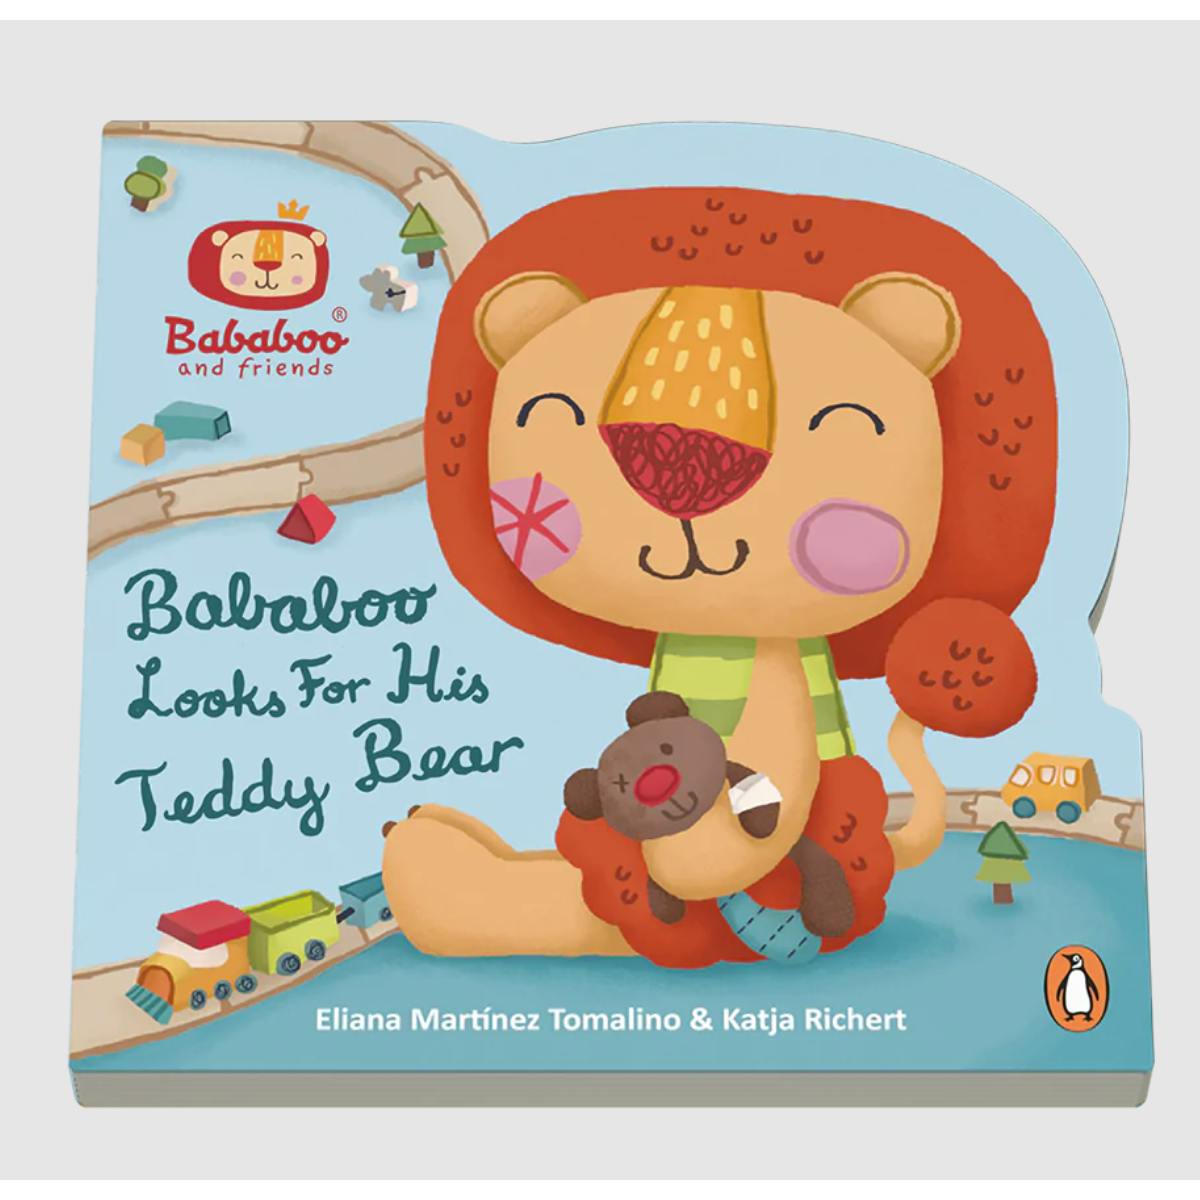 Bababoo and Friends "Bababoo Looks for His Teddy Bear" Board Book 